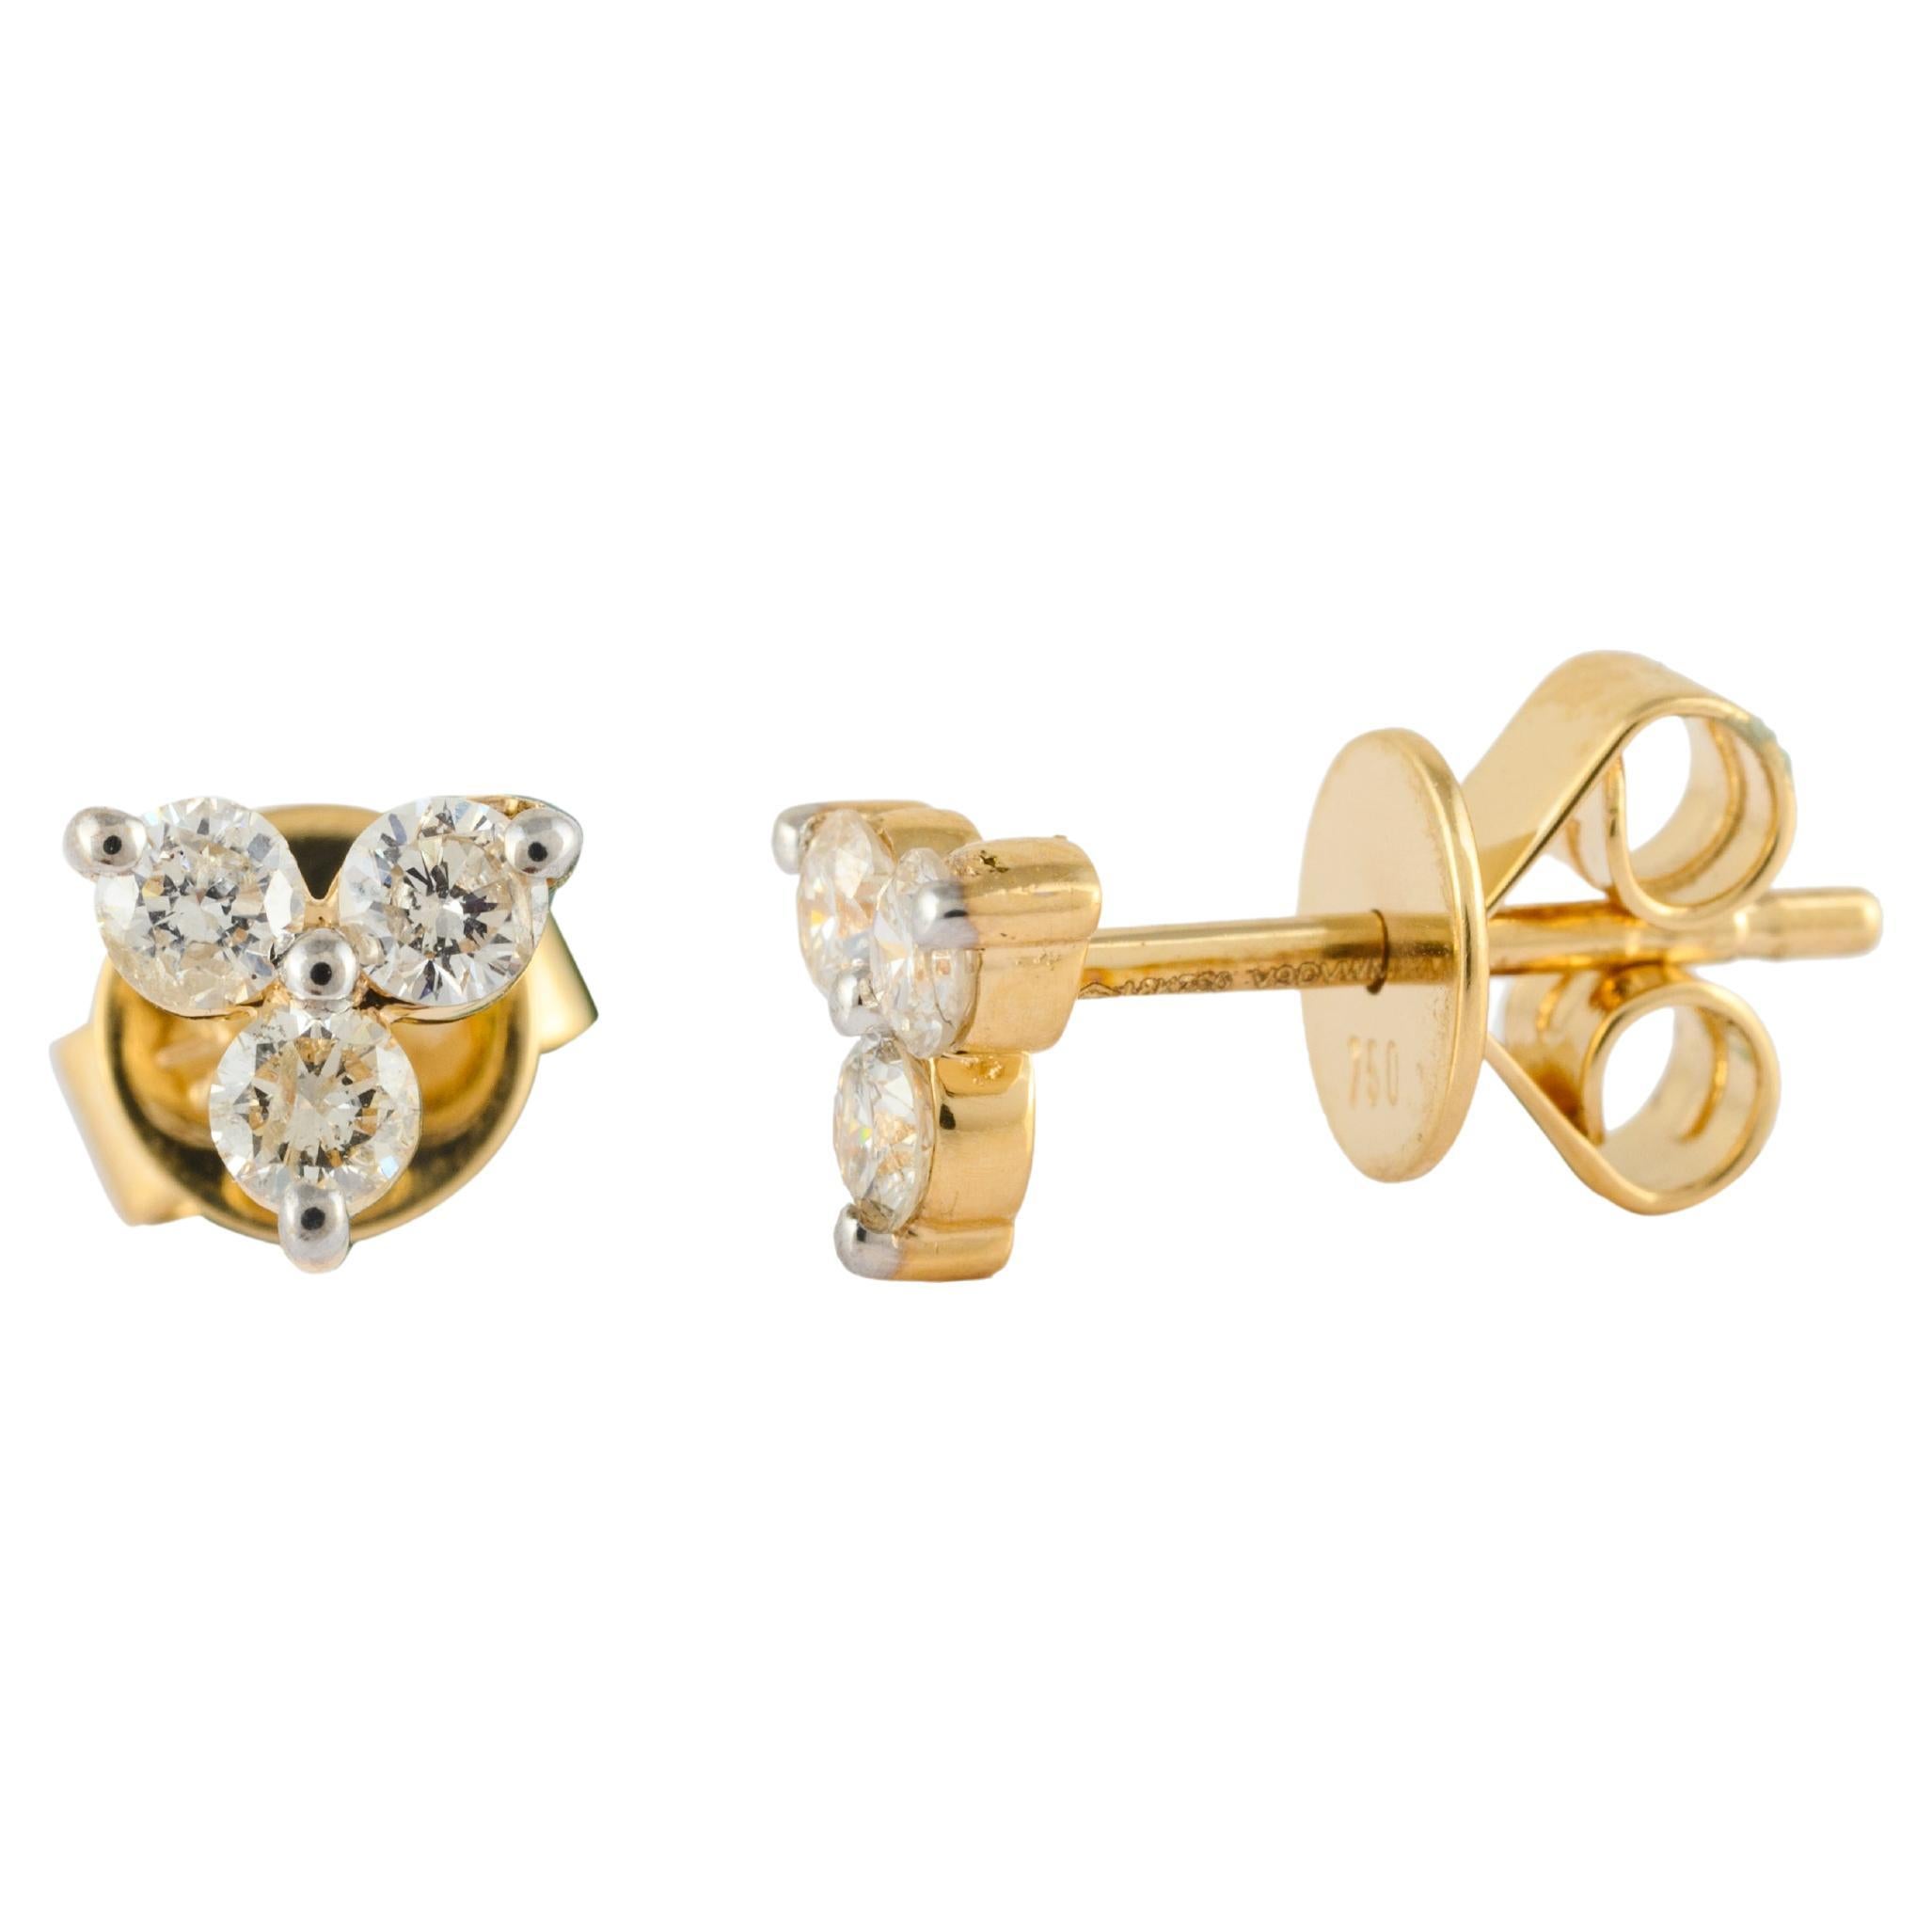 Natural Three Diamond Pushback Stud Earrings Made in 18k Solid Yellow Gold